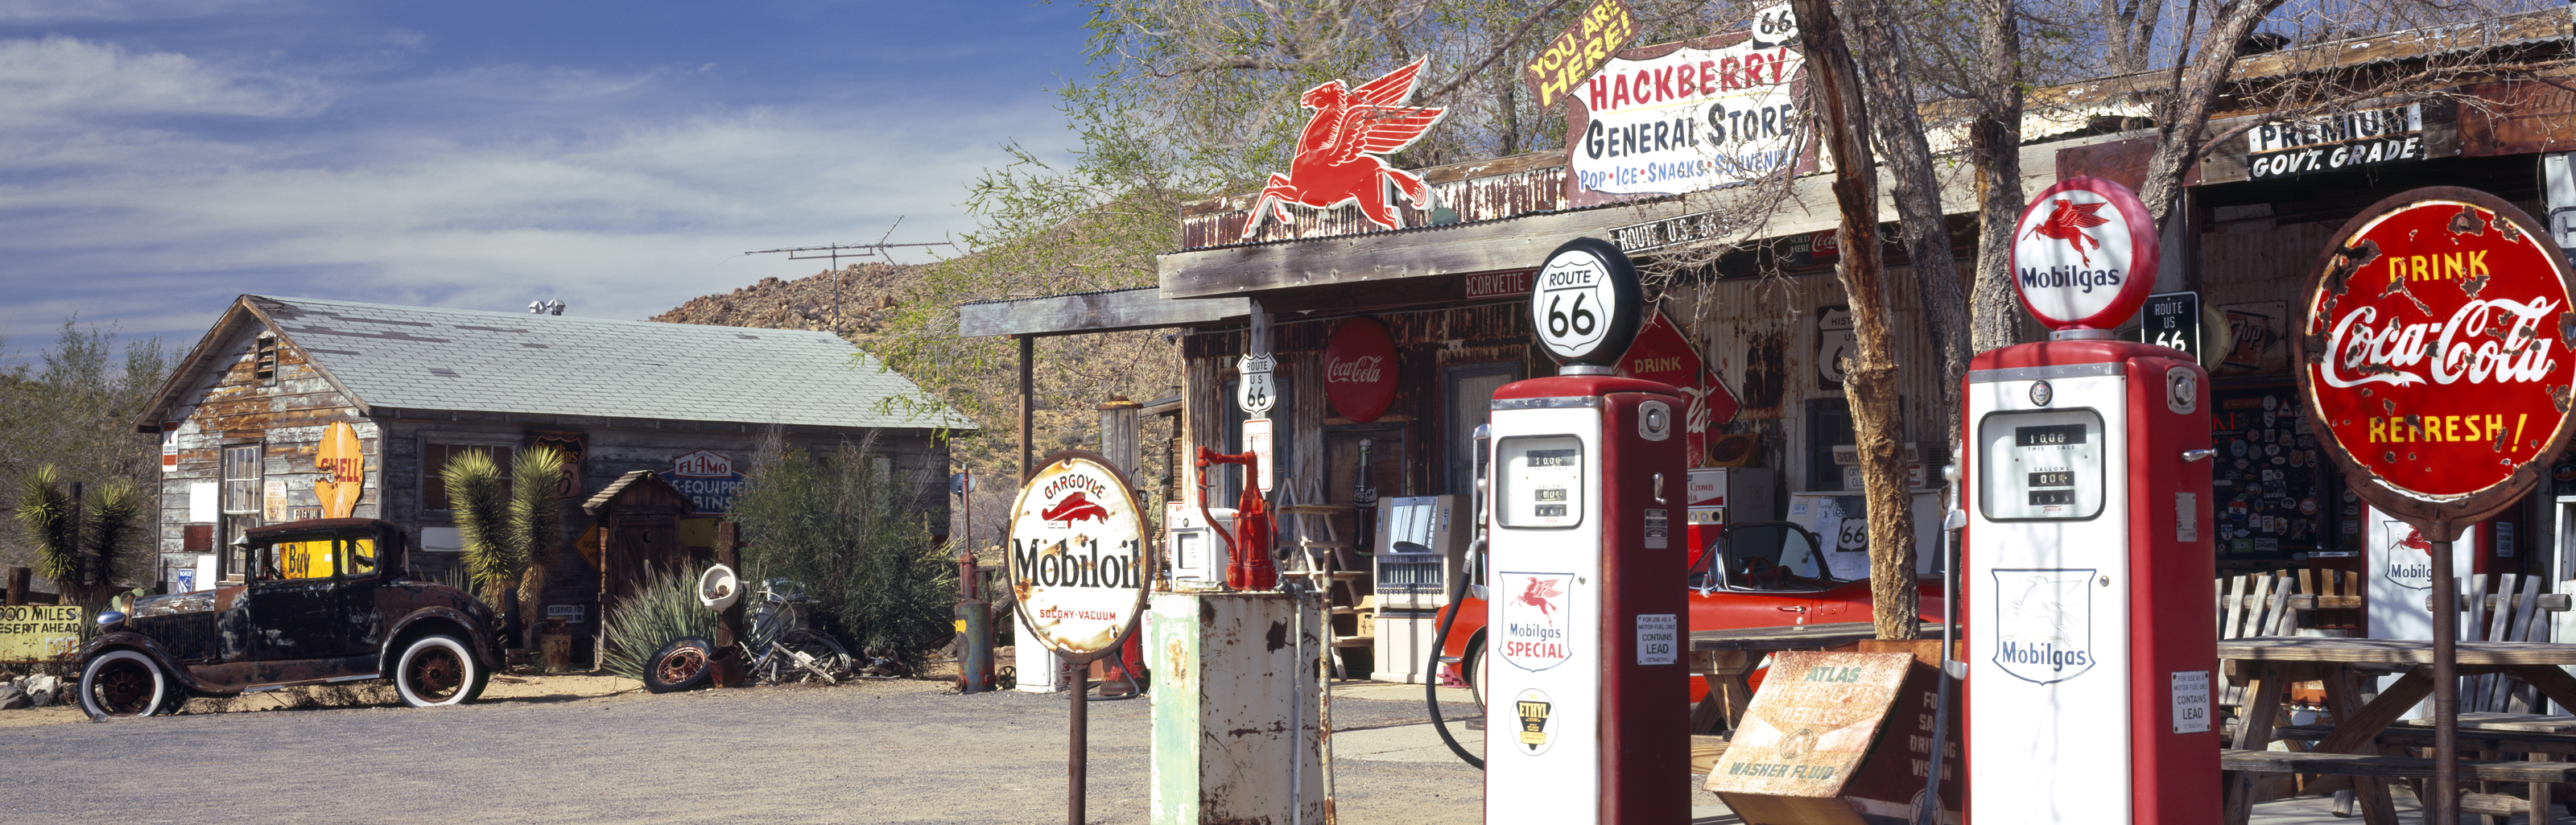 Vintage Gas Station On Route 66 Wall Mural